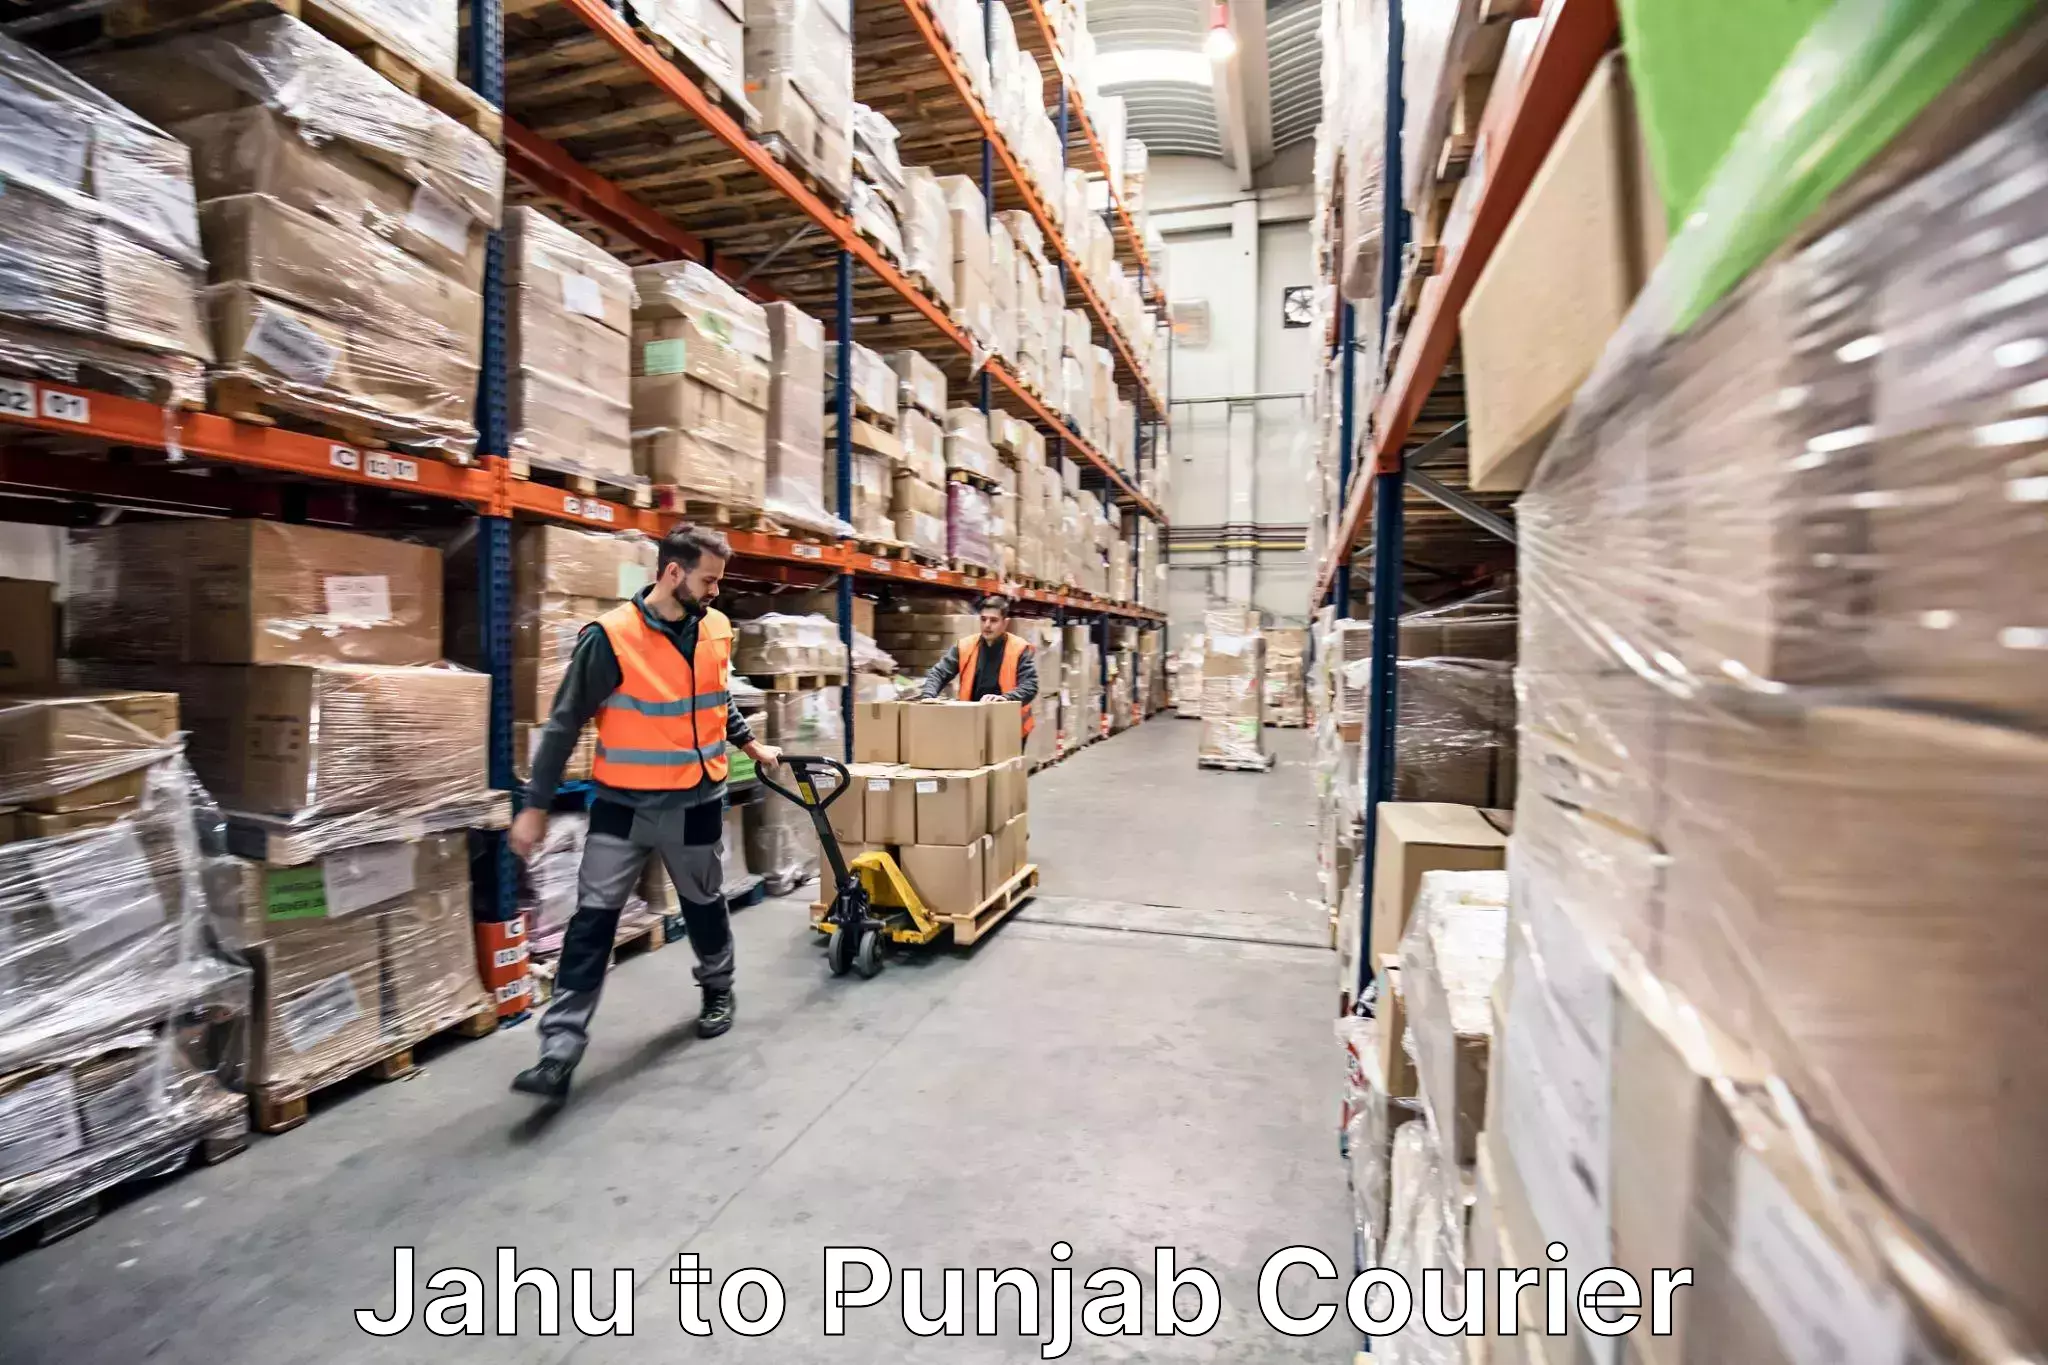 Furniture transport experts in Jahu to Mohali